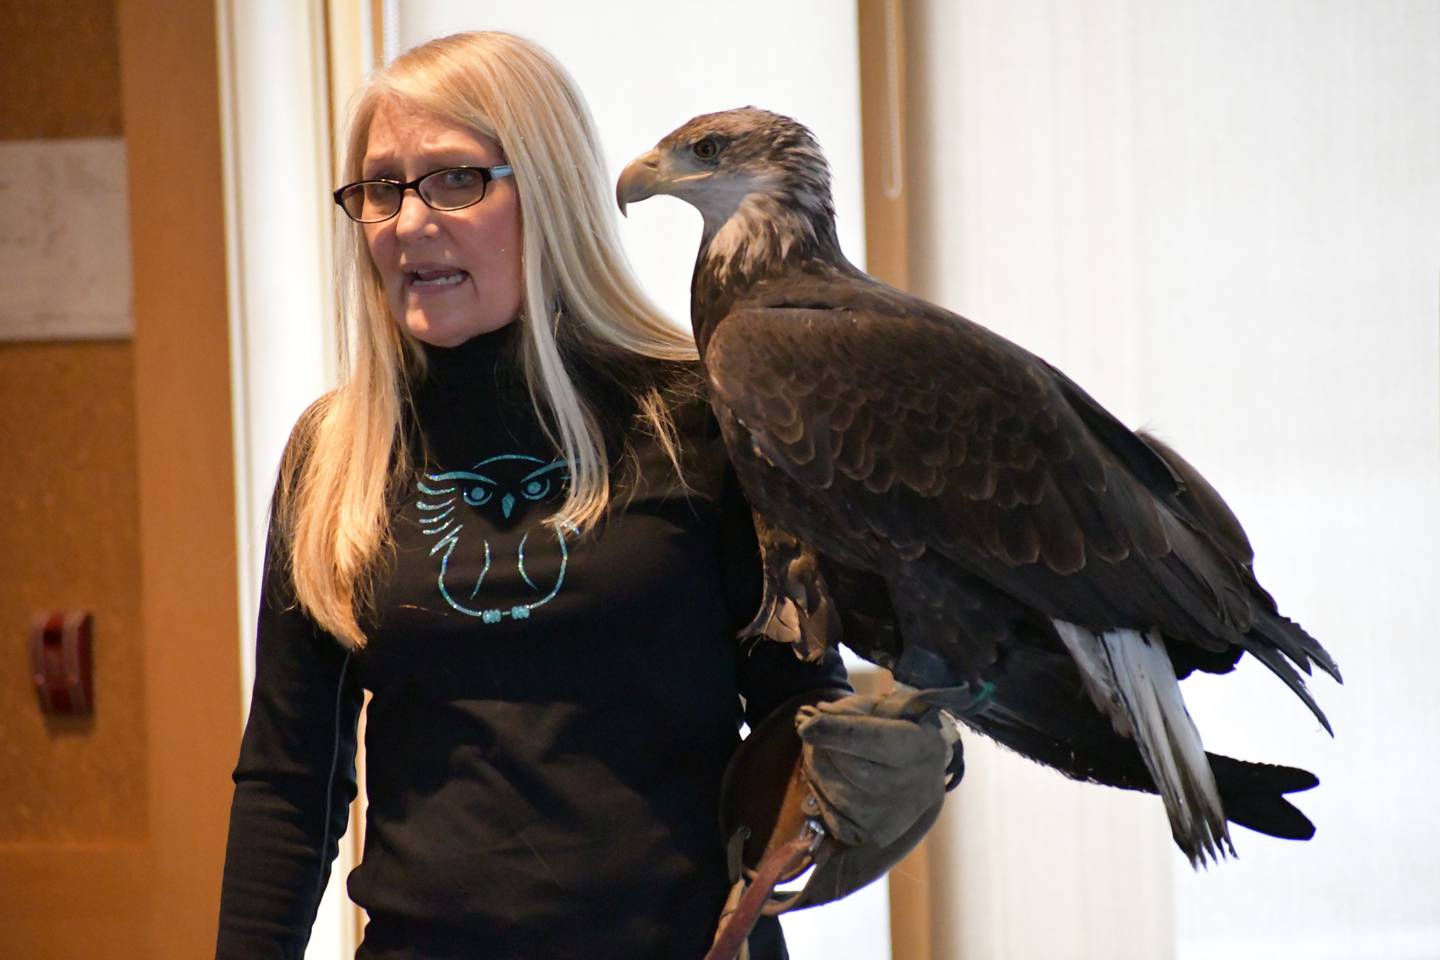 Dianne Moller is a licensed educator, falconer, rehabilitator, eagle handler through state and federal agencies and  founder of Hoo’s Woods Raptor Center in Wisconsin. She has presented live raptors at Eagle Watch in the past and will do so again on Jan. 14 at the Forest Preserve District of Will County's Four Rivers Environmental Education Center in Channahon.